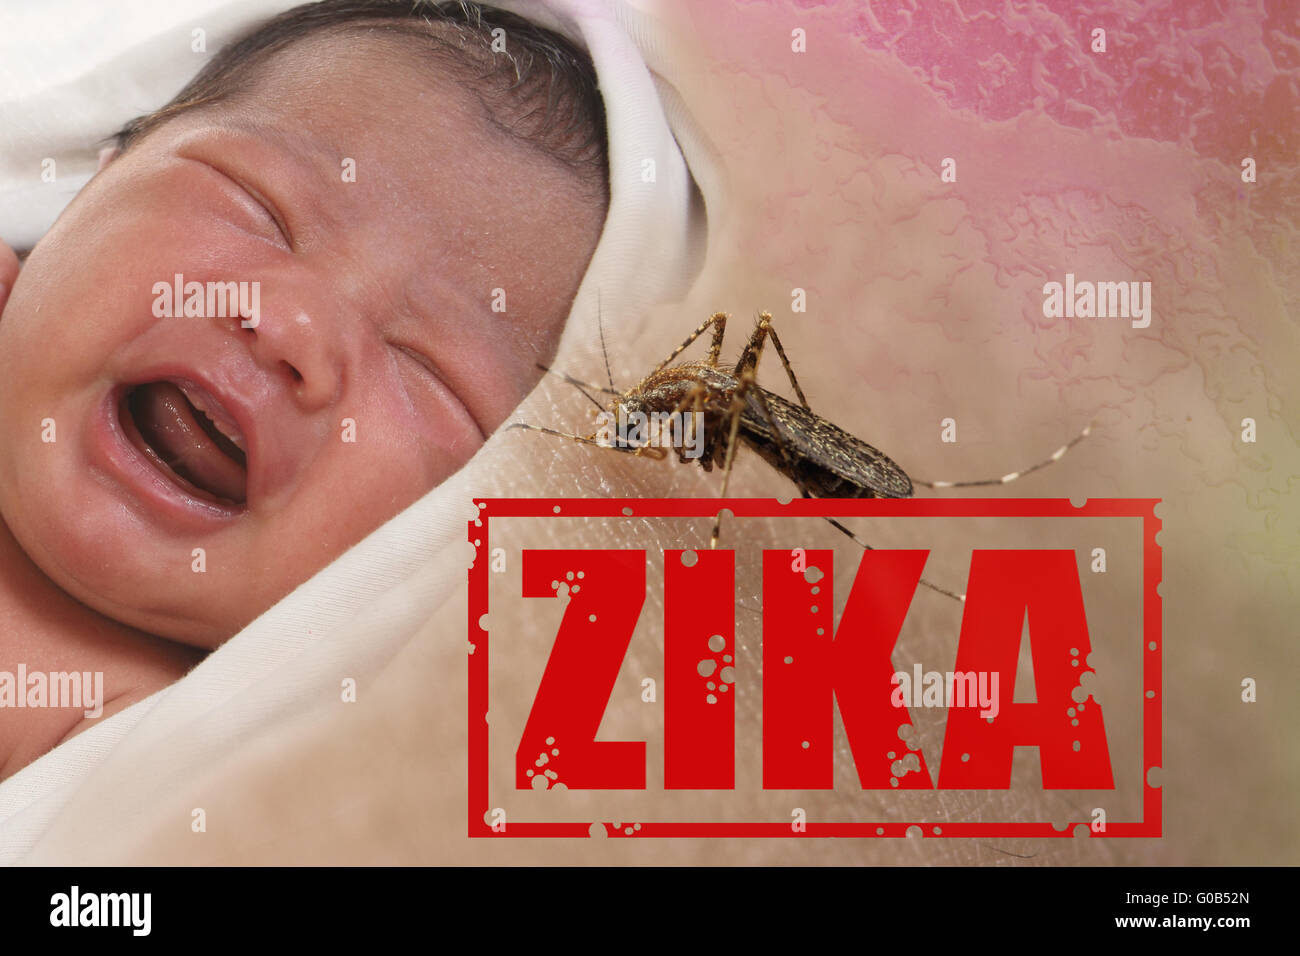 Health issue concept, image of crying baby bitten by Aedes Aegypti mosquito as Zika Virus carrier Stock Photo